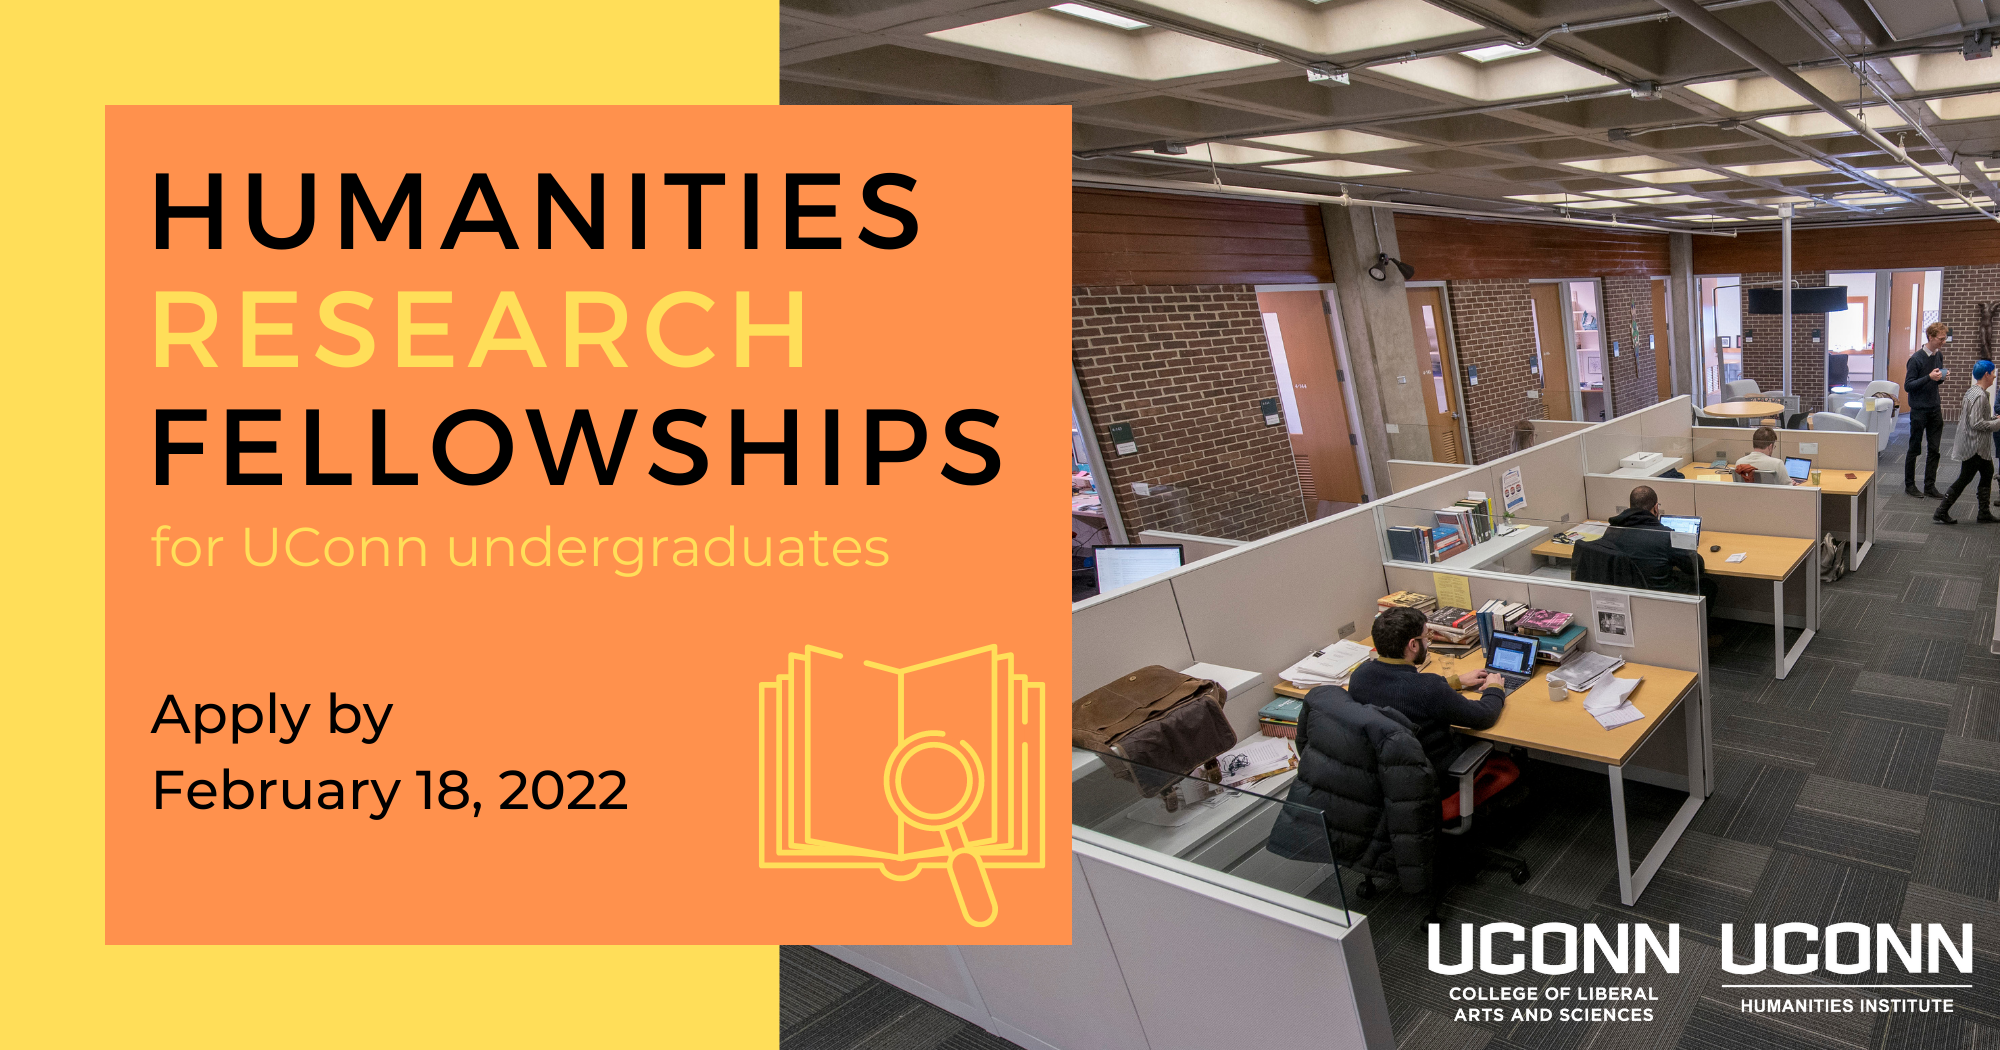 Humanities research fellowships for UConn undergraduates. Apply by February 18, 2022.